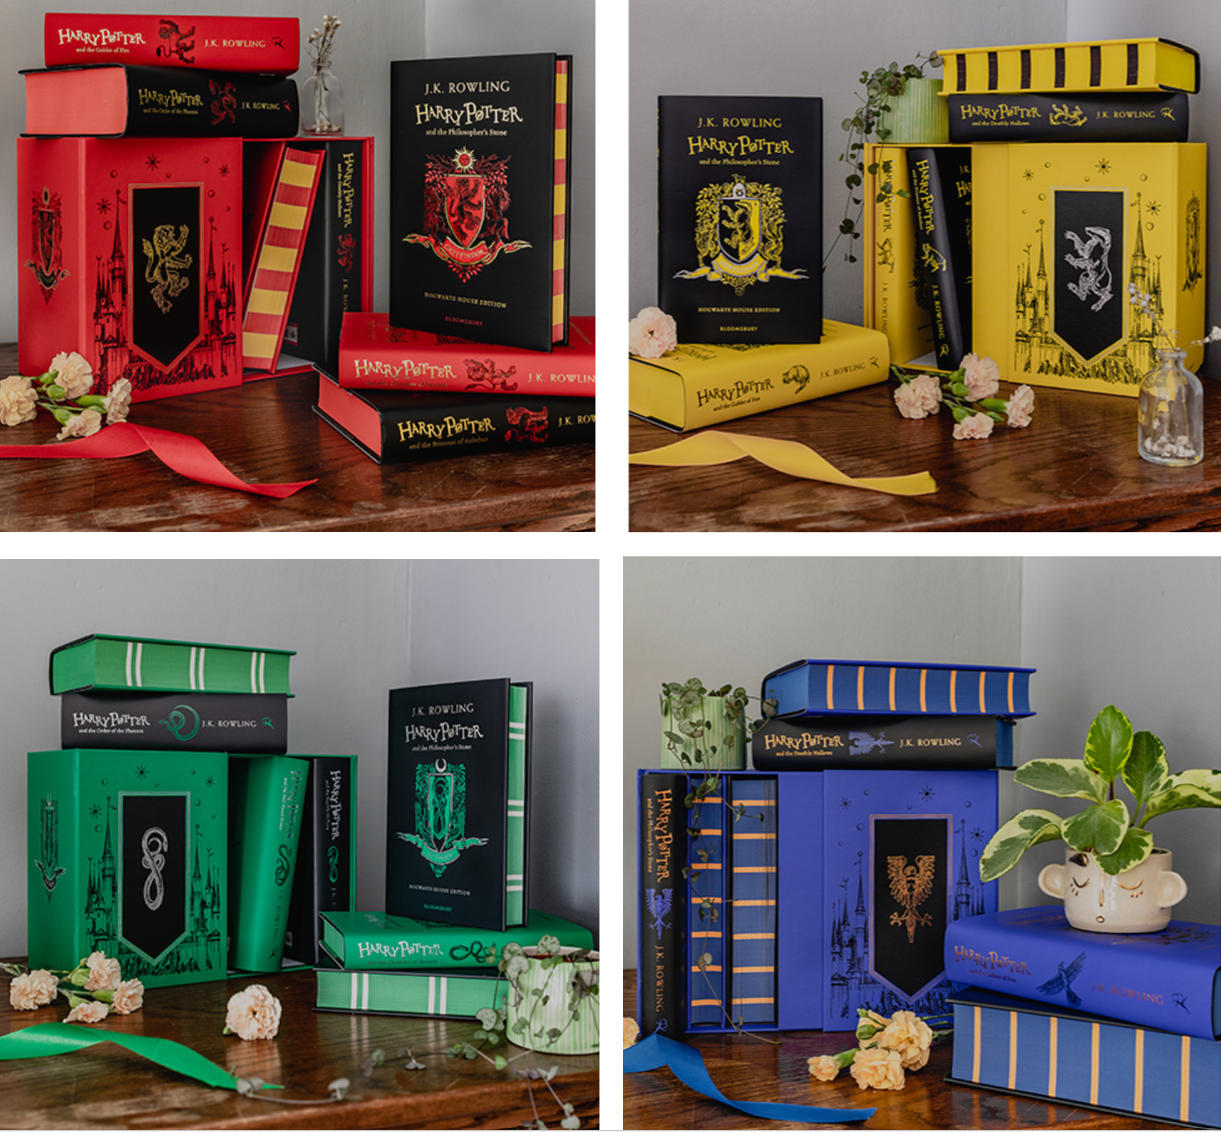 "Harry Potter" House Edition Box Sets for each House